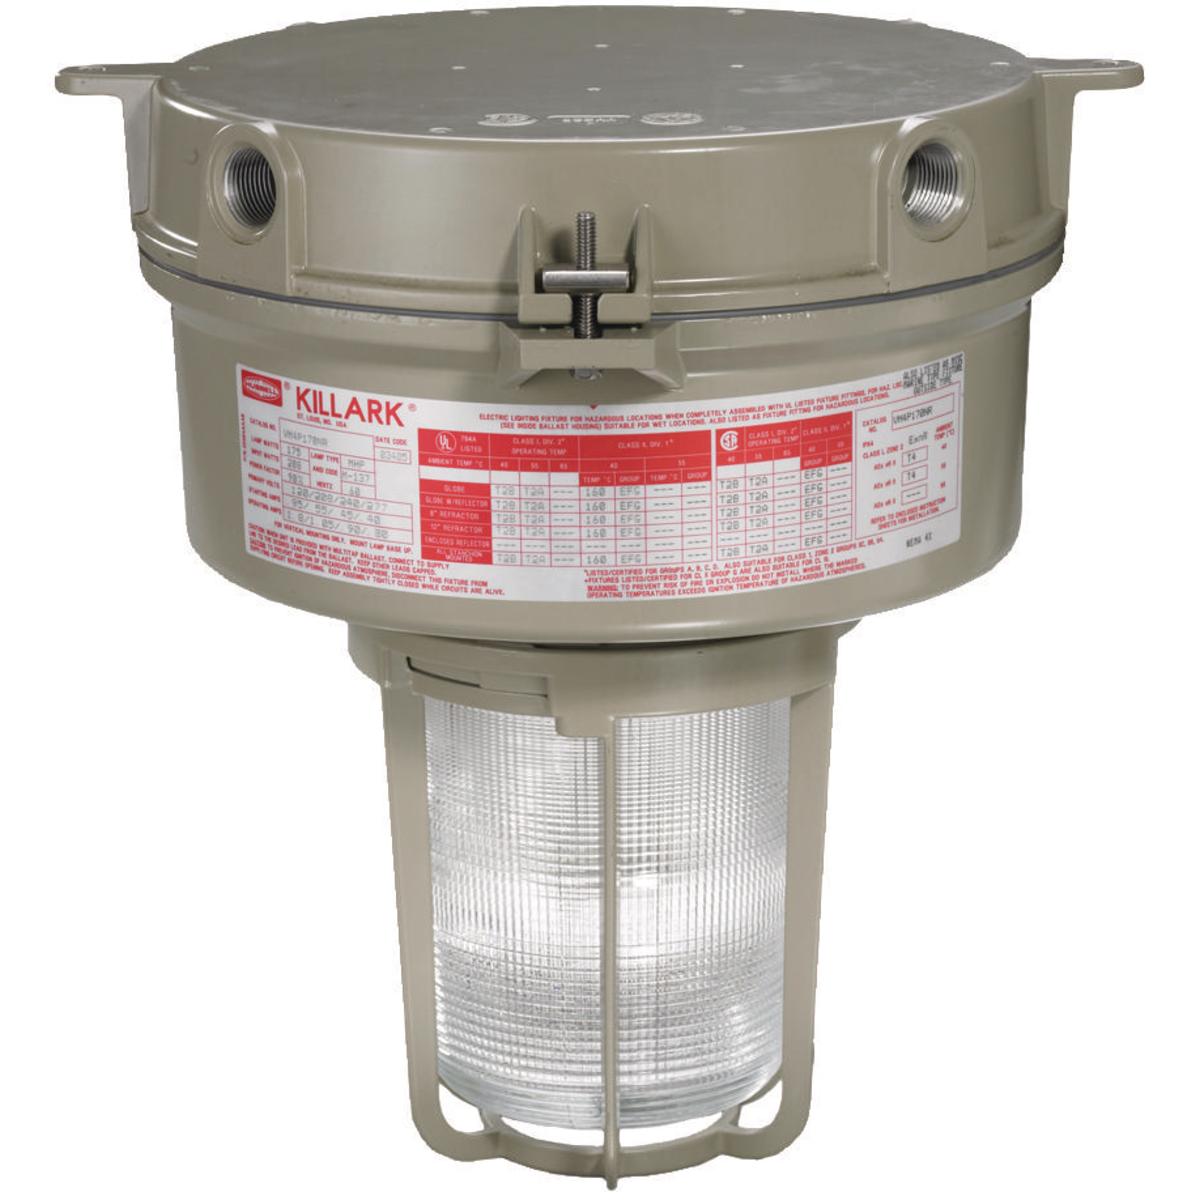 Hubbell VE3Q0064E30X2R5G VE3 64W Emergency, 120-277V, 3/4" Ceiling Mount, Type V Glass Refractor  with Guard  ; Quad-Pin triple-tube long-life compact fluorescent lamps included ; World Voltage 120-277VAC 50-60 Hz ; LED charging indicator light visible through lens ; Prewired ter